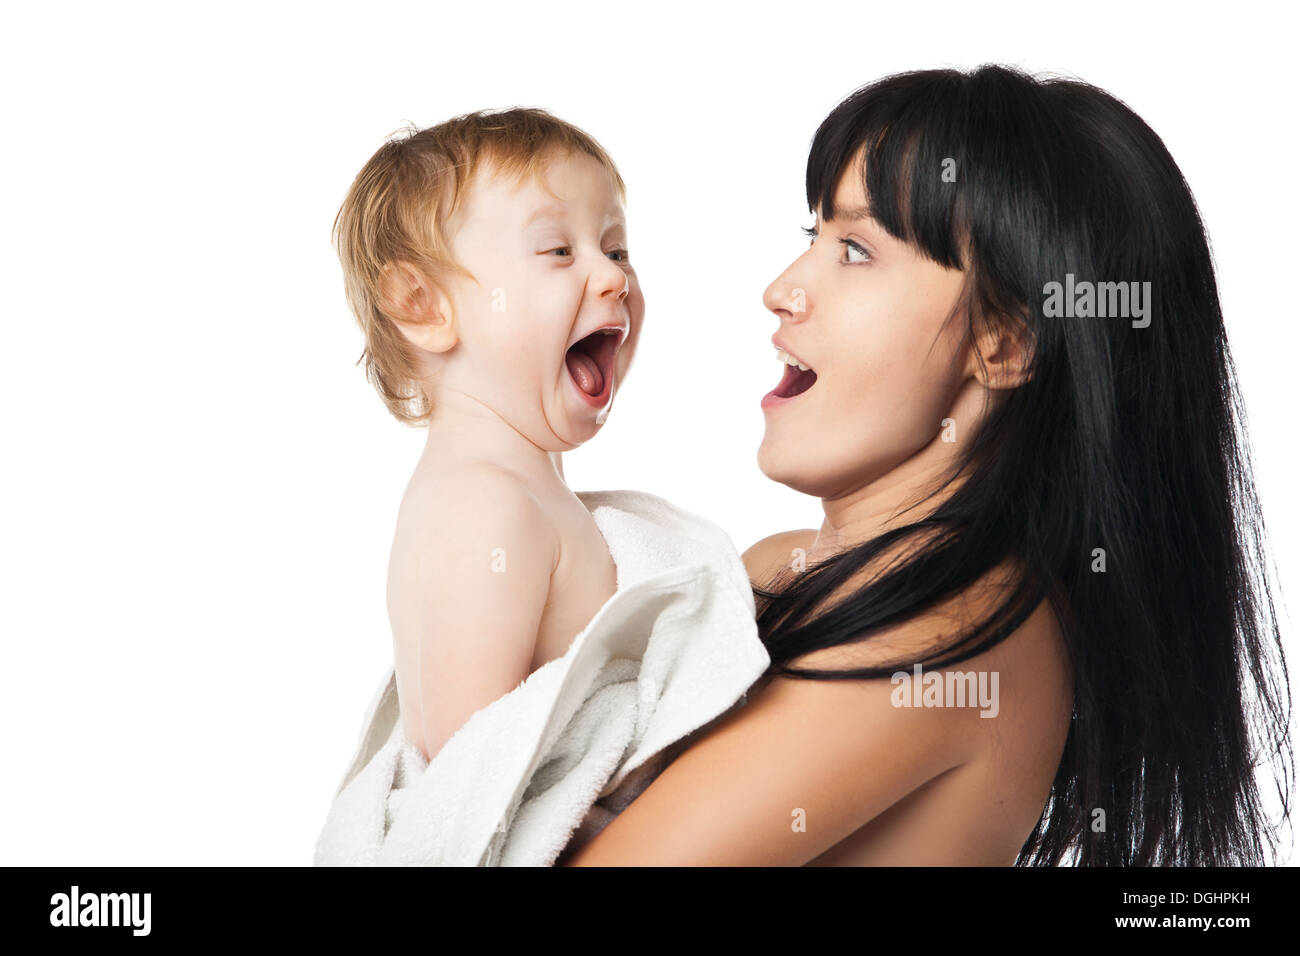 Mother with her baby after bathing in white towel Stock Photo